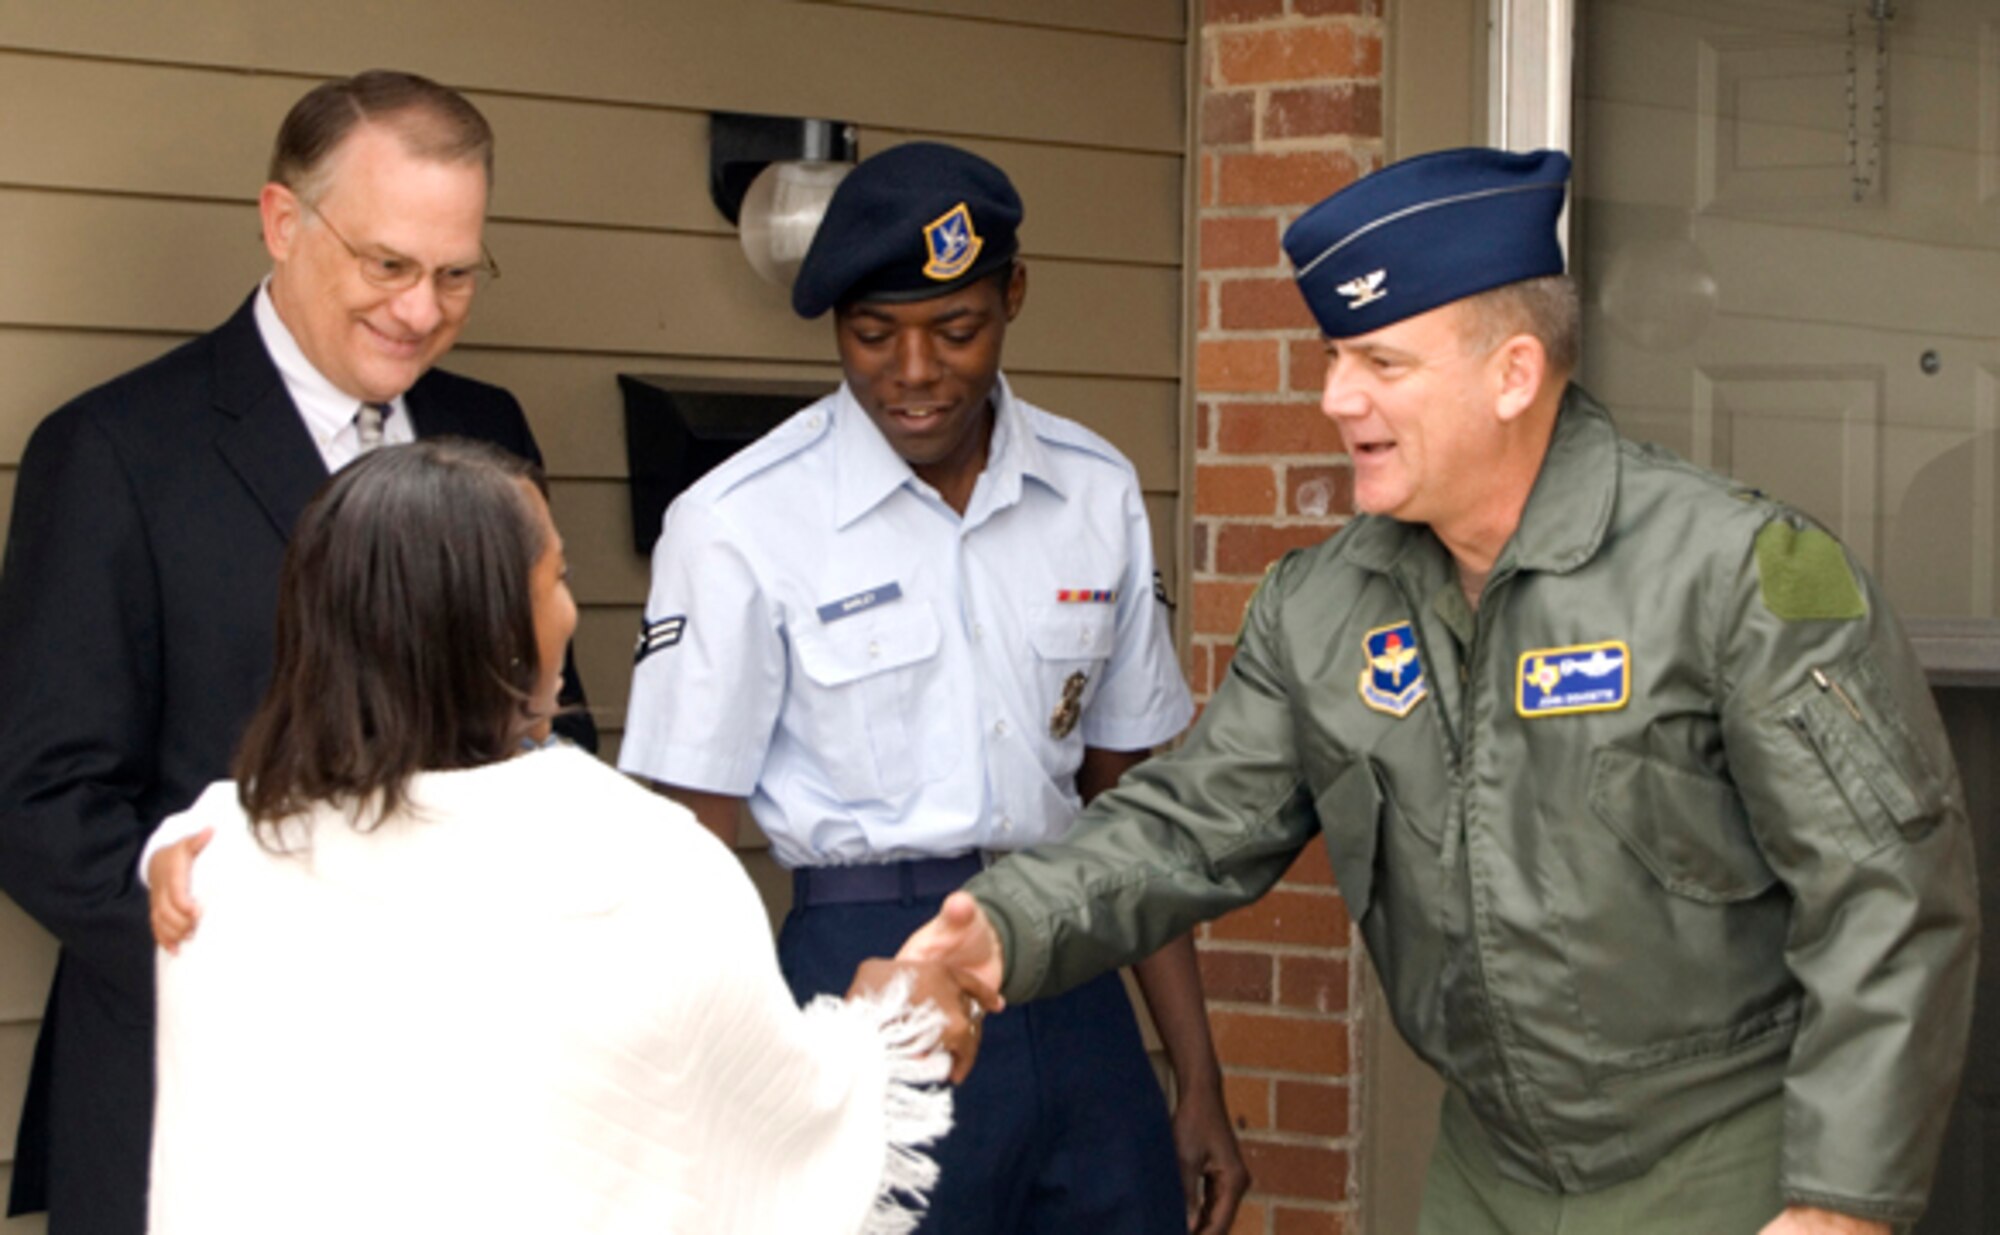 LAUGHLIN AIR FORCE BASE, Texas – Col. John Doucette, 47th Flying Training Wing commander, welcomes Airman 1st Class Remario Barley, 47th Security Forces Squadron, and his family to their new home and the very first fully renovated military family housing unit here recently. The new home is one of 450 units on base that will be fully renovated in effort to provide a better quality of life for Laughlin members. (U.S. Air Force photo by Charlena Cavender)   